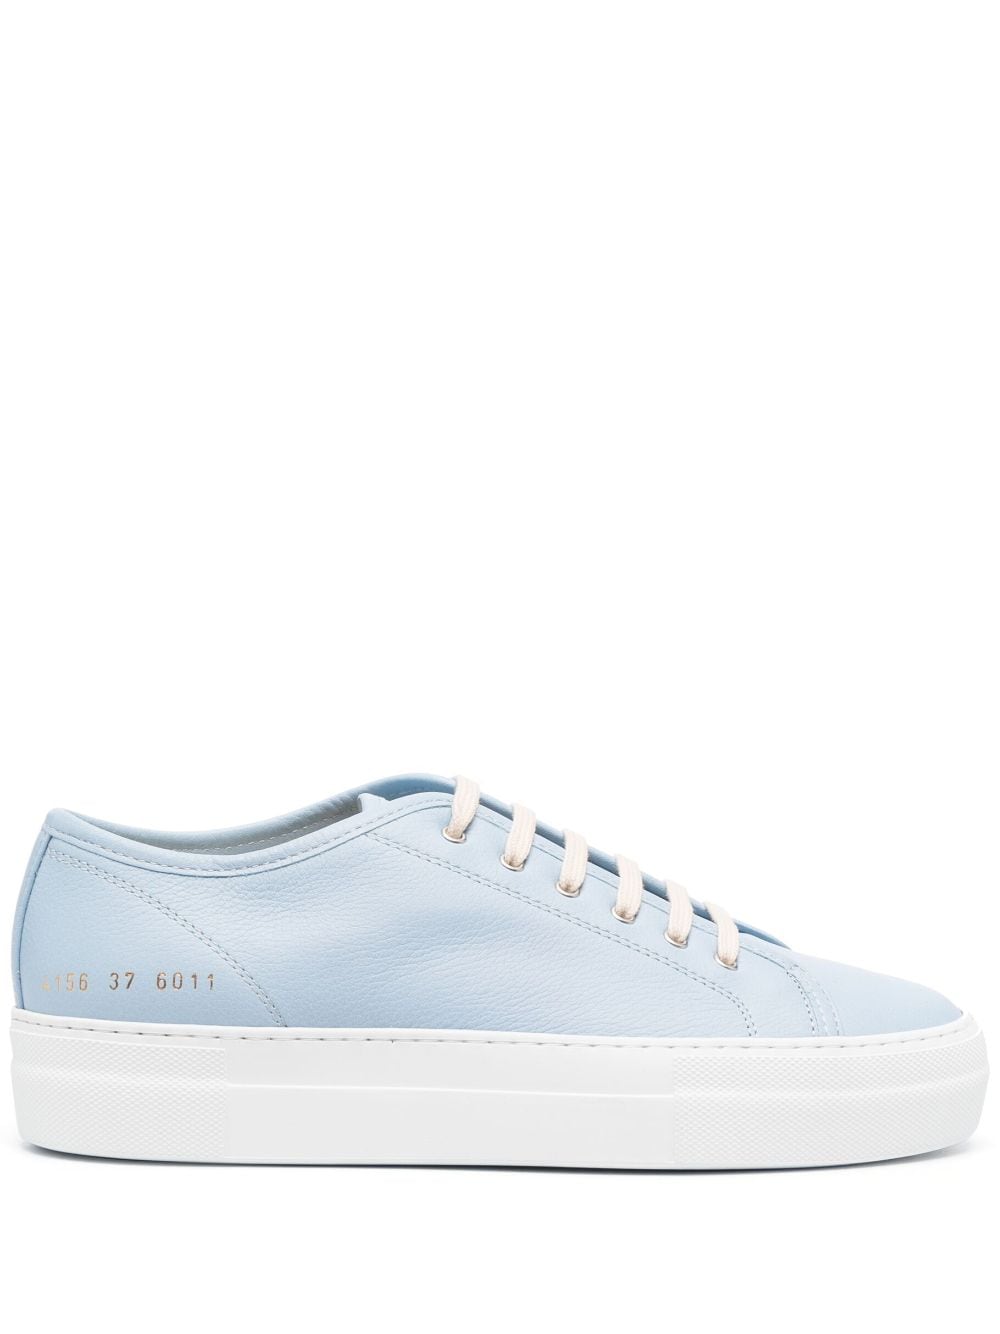 Common Projects Tournament Sneakers - Blau von Common Projects